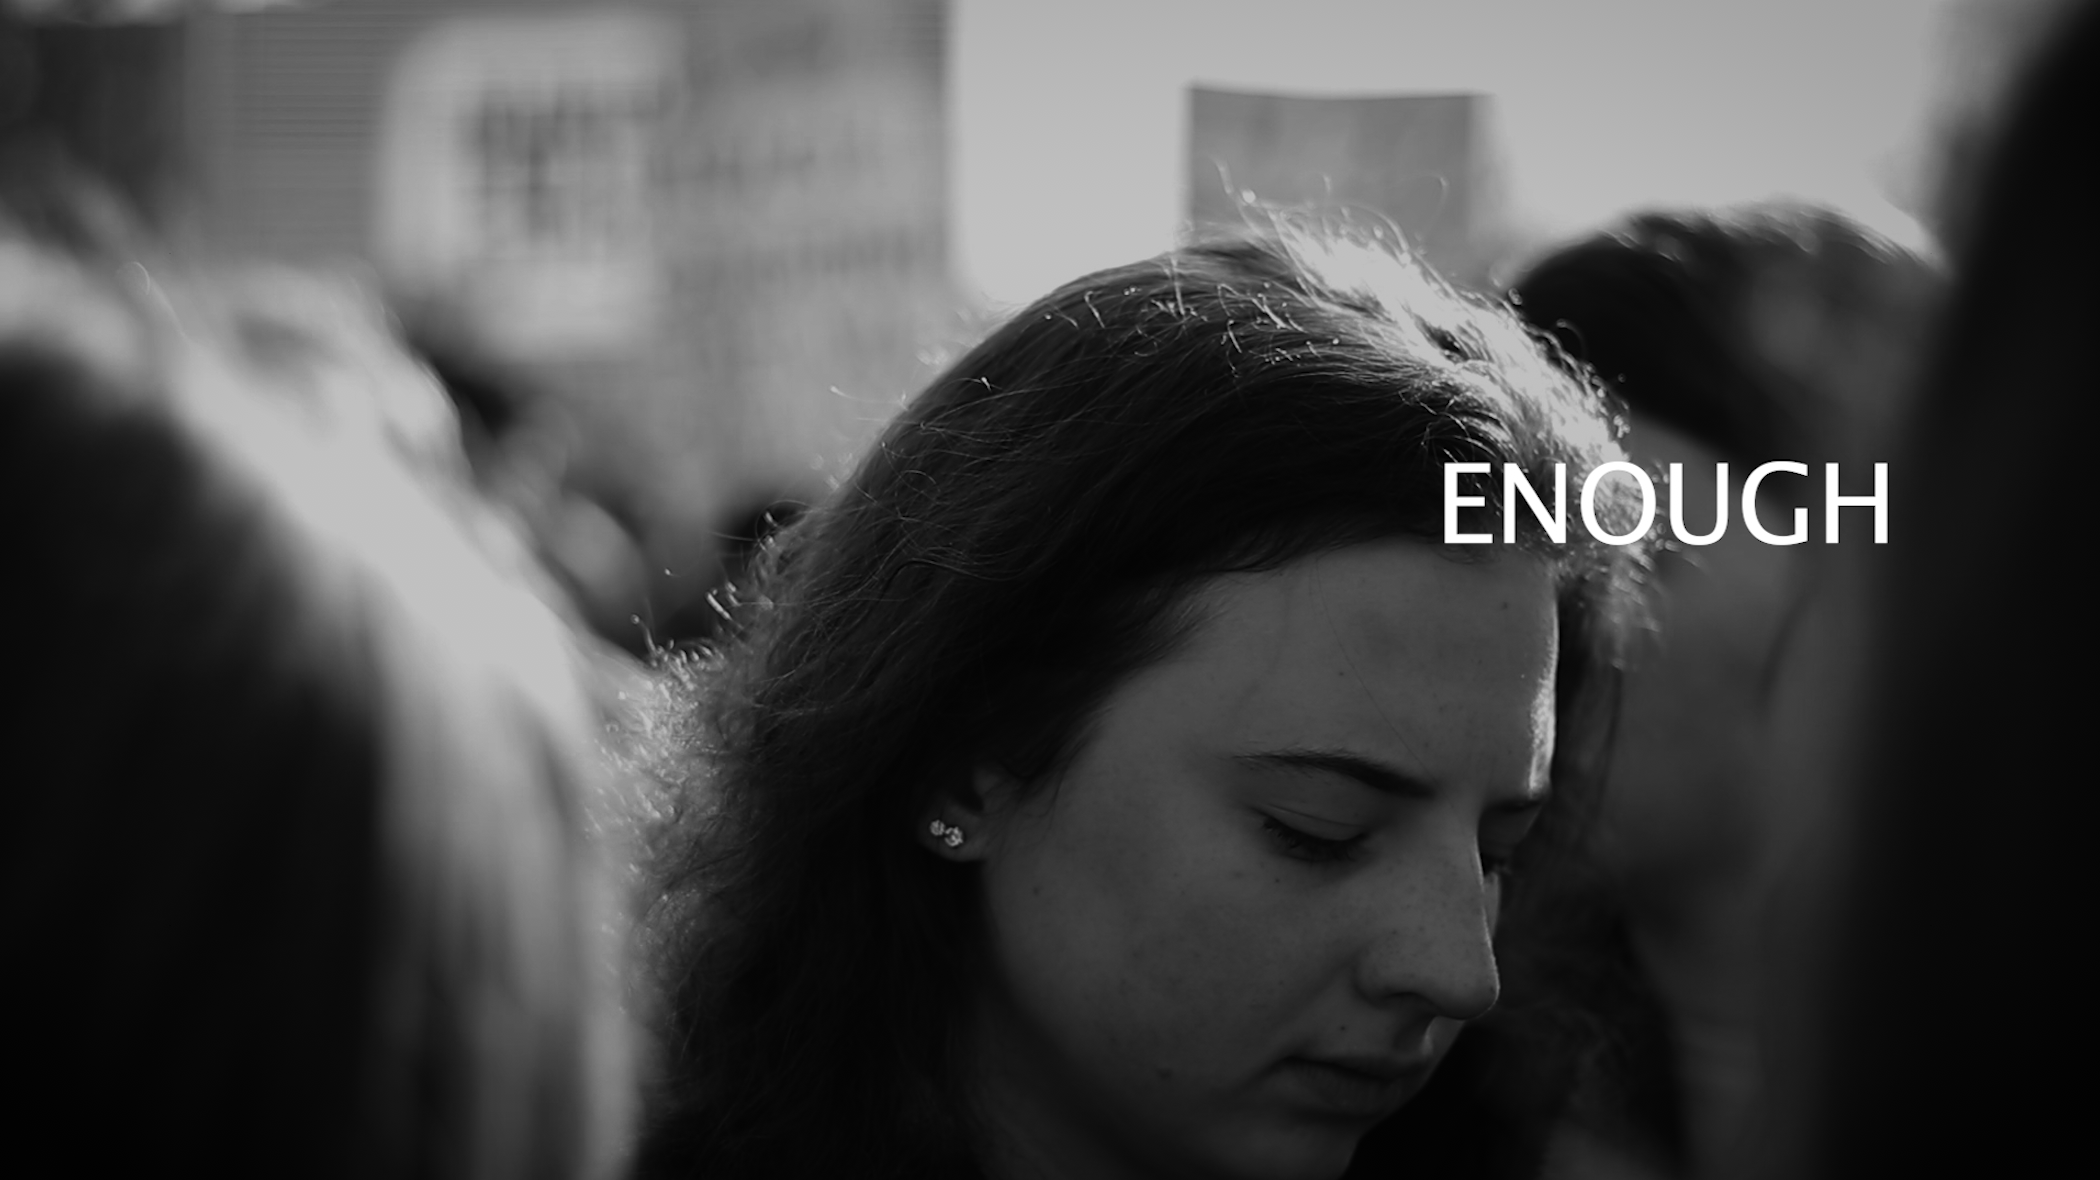 Enough; A March For Our Lives mission statement